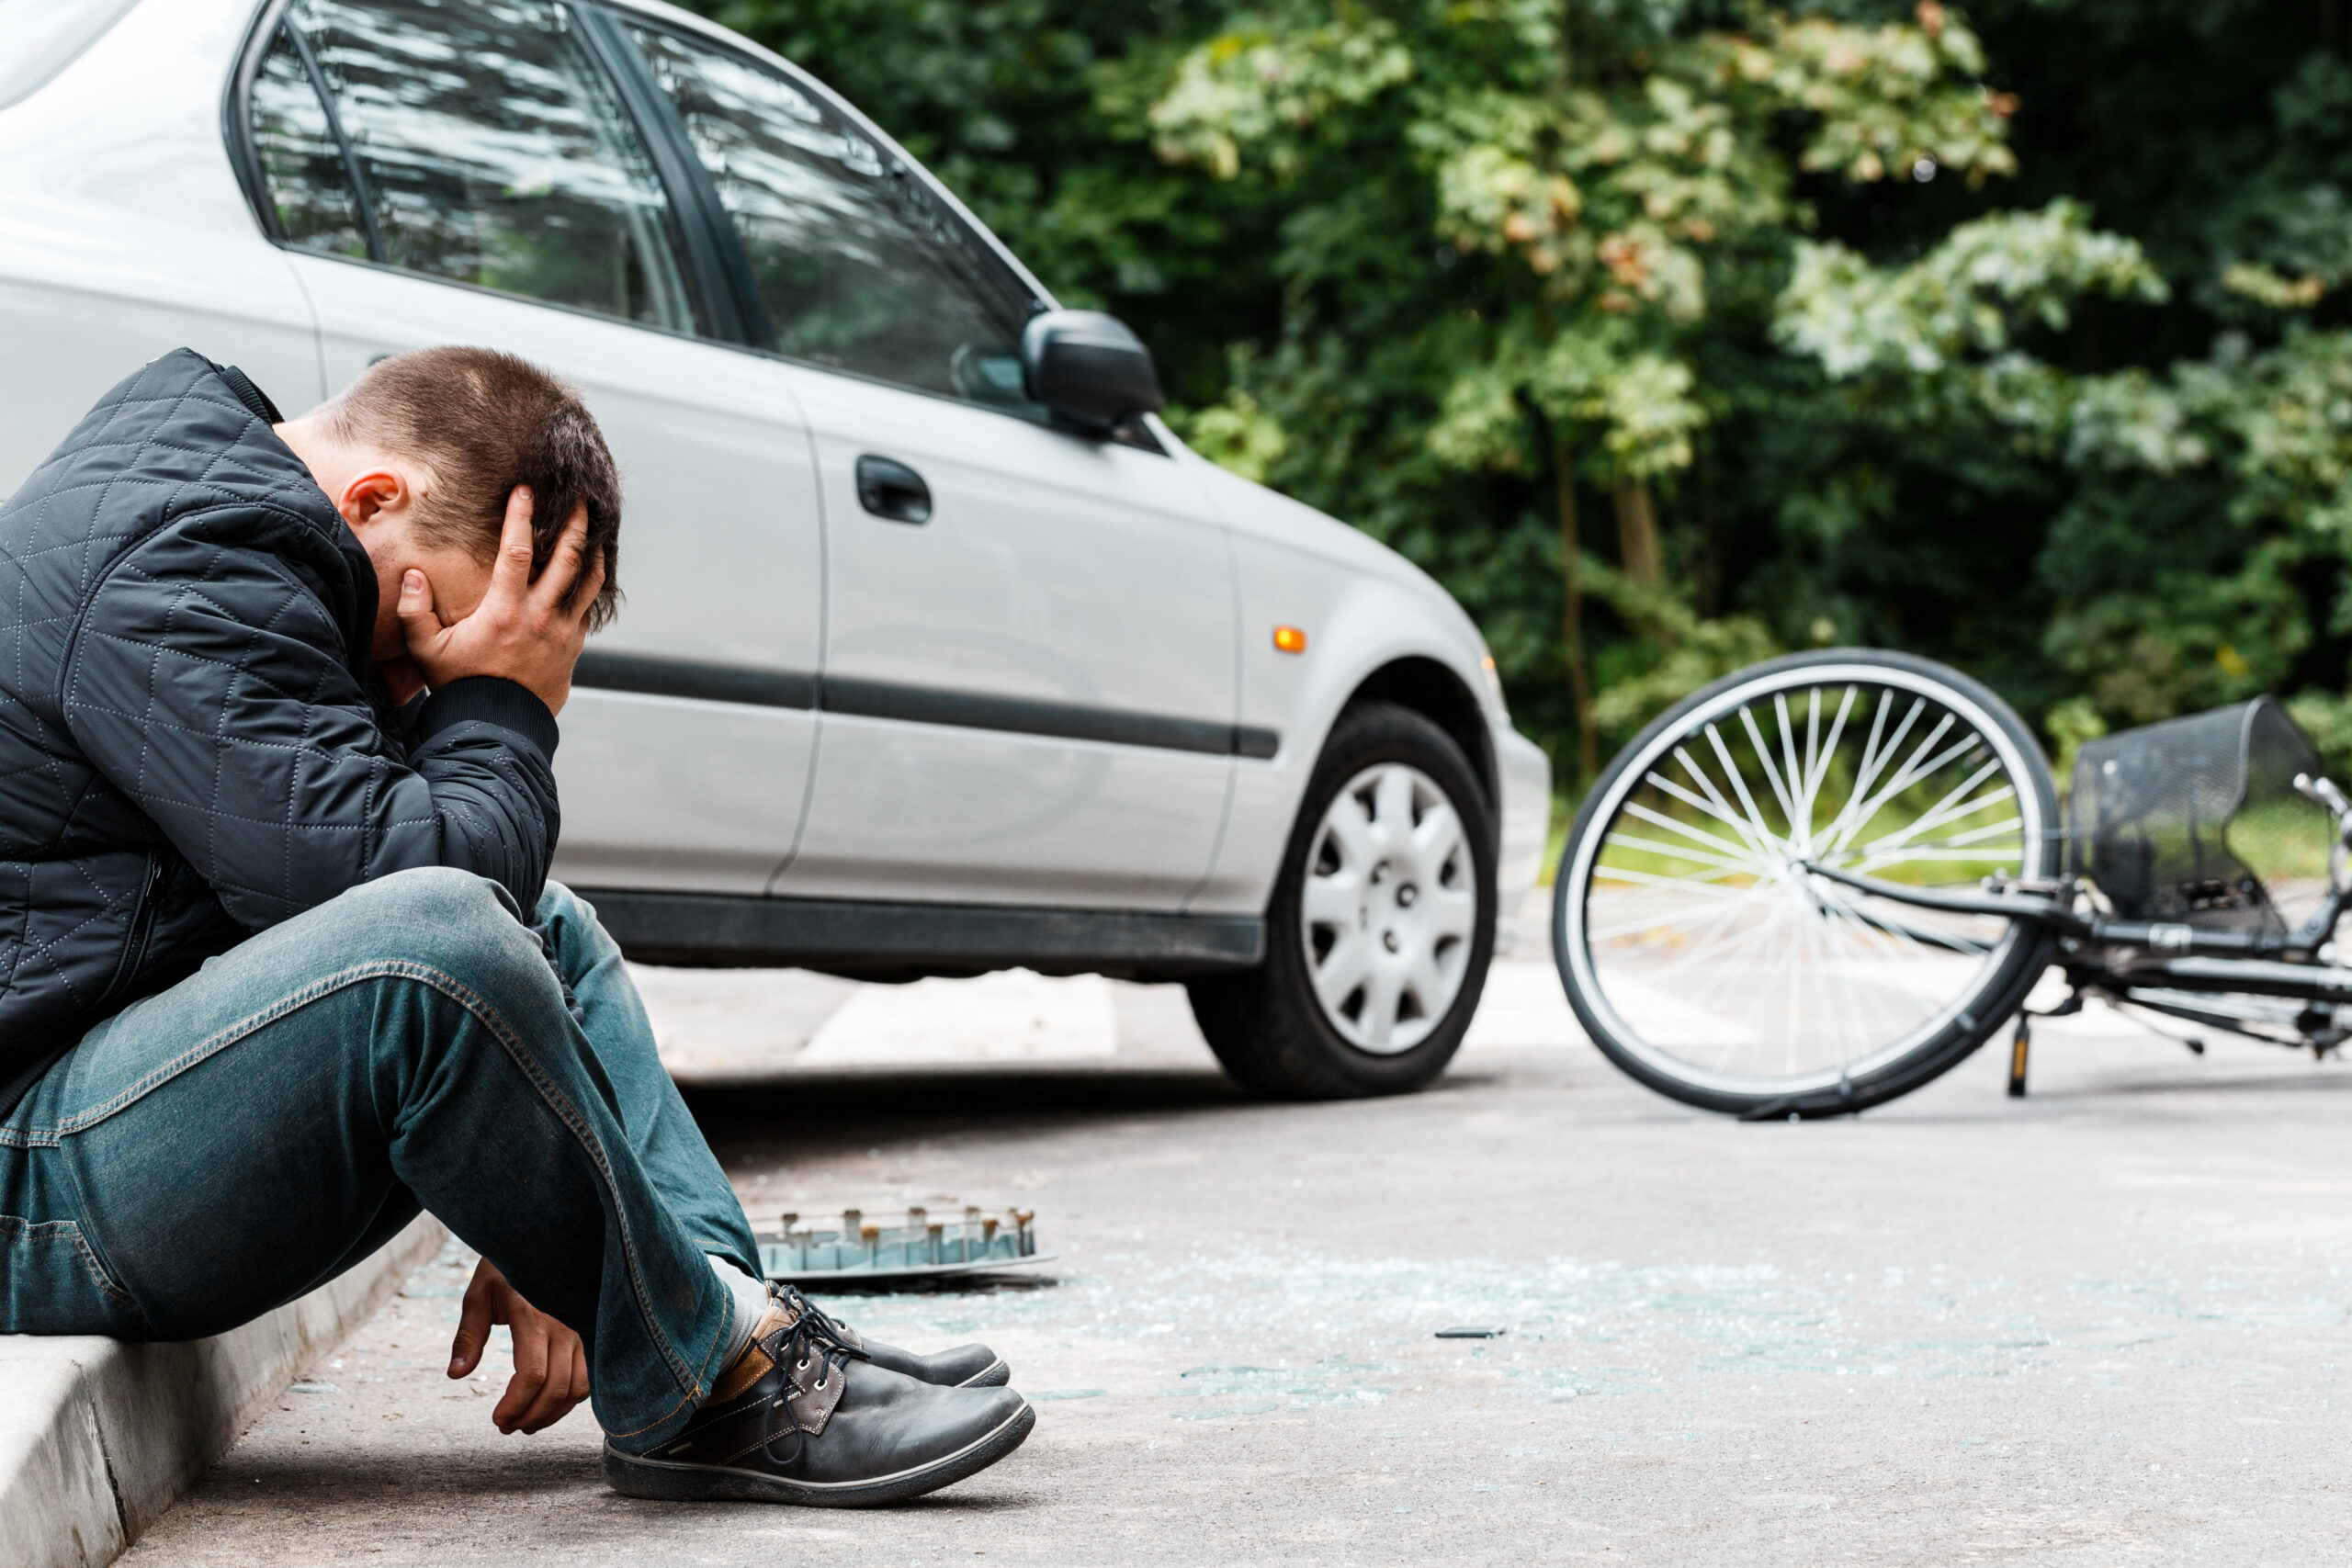 Bicycle Accidents and Children: How to Keep Your Kids Safe on the Road